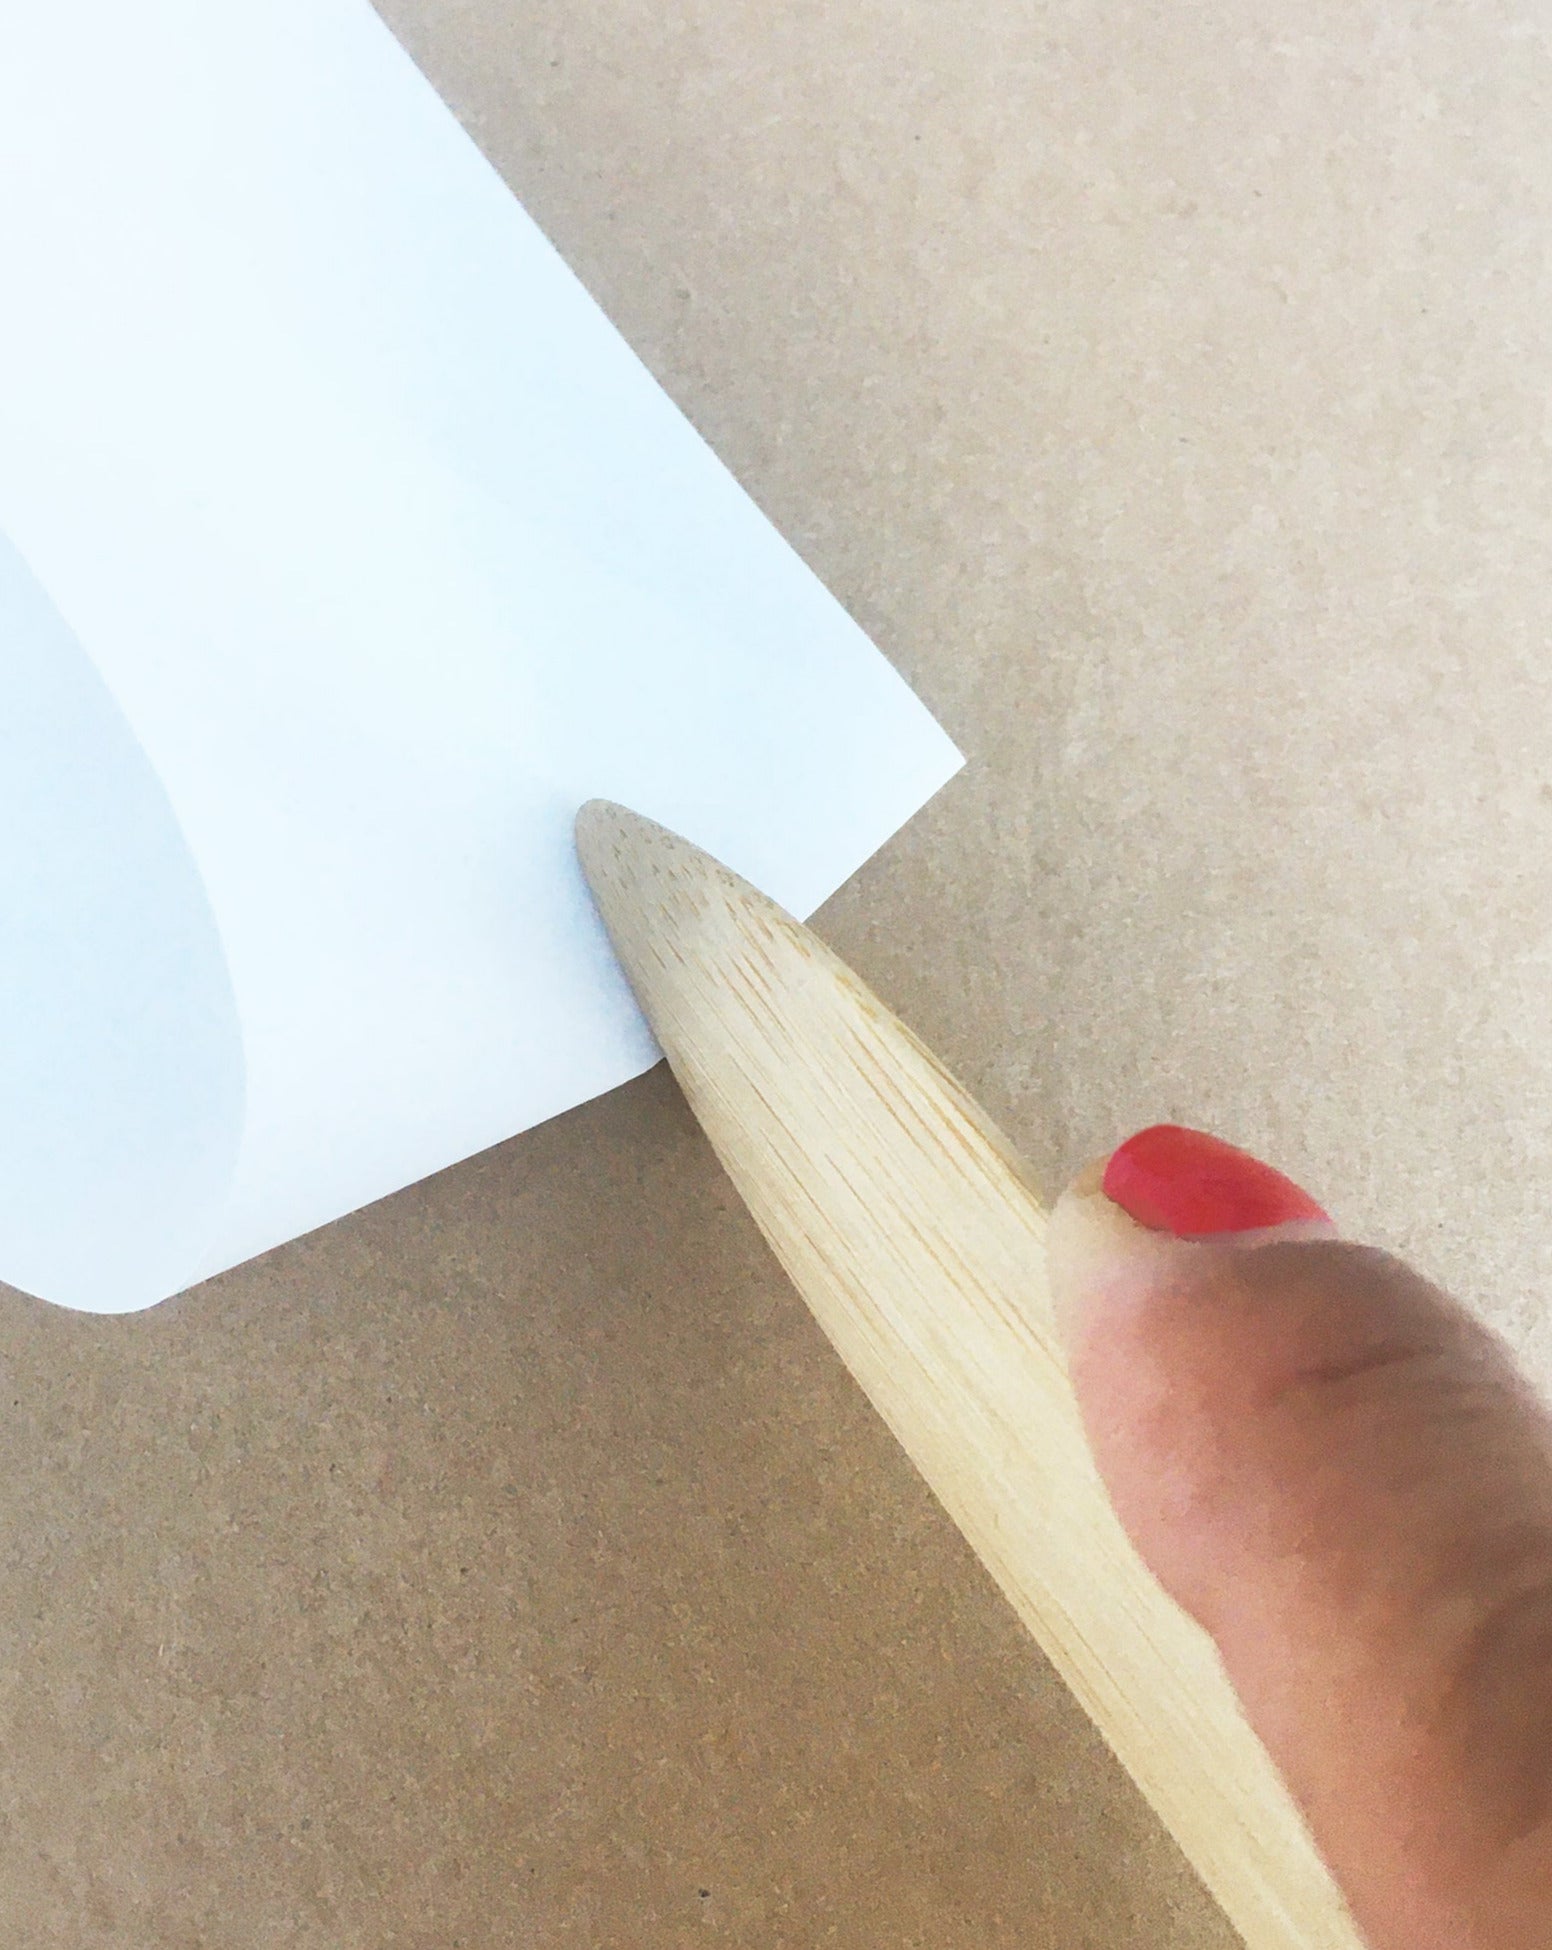 Example image of a seam creaser, folding a piece of paper for the crisp and clean edge